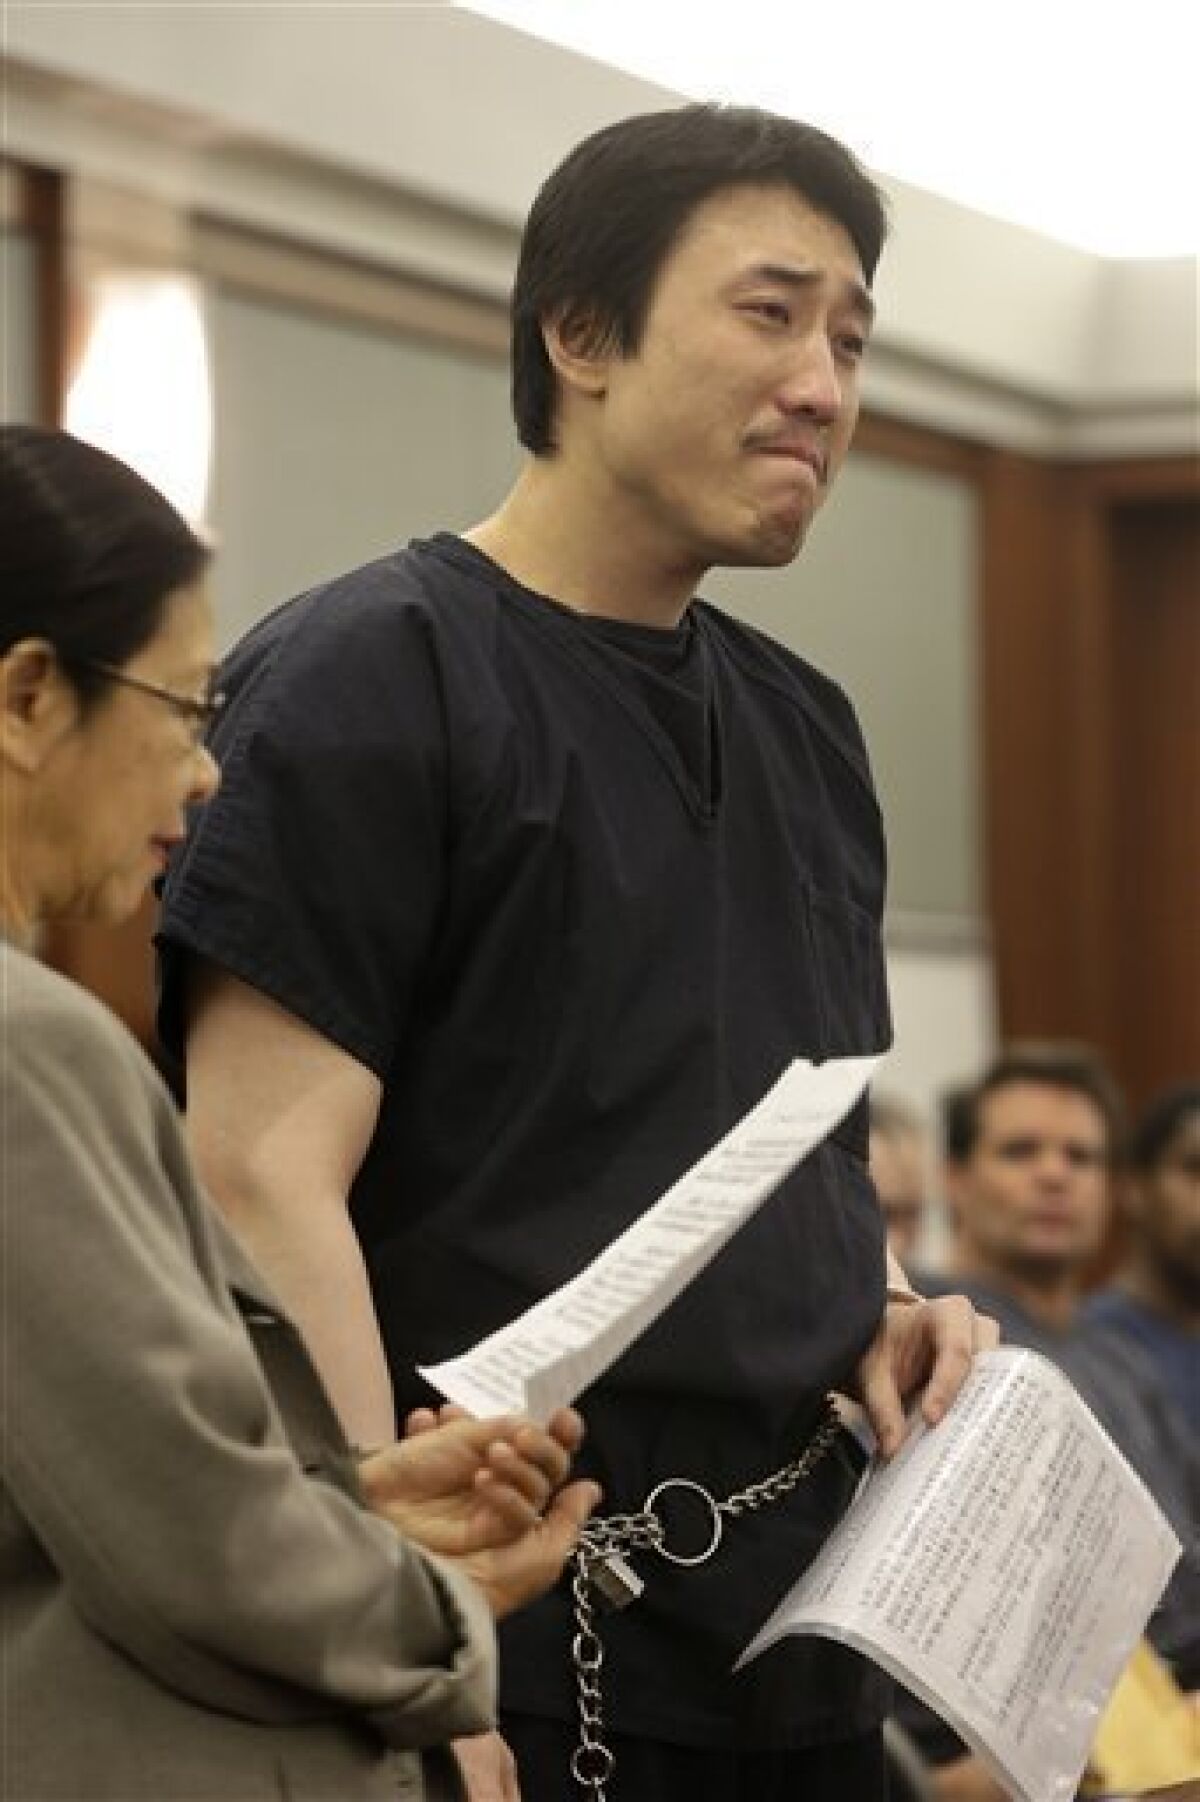 Xiao Ye Bai reads a statement to the court during his sentencing, Tuesday, March 5, 2013, in Las Vegas. The 26-year-old Chinese immigrant, convicted of being an enforcer for a Taiwan-based criminal gang, will spend the rest of his life in a Nevada prison for killing one person and wounding two others in a bloody knife attack in a Las Vegas karaoke bar in July 2009. (AP Photo/Julie Jacobson)